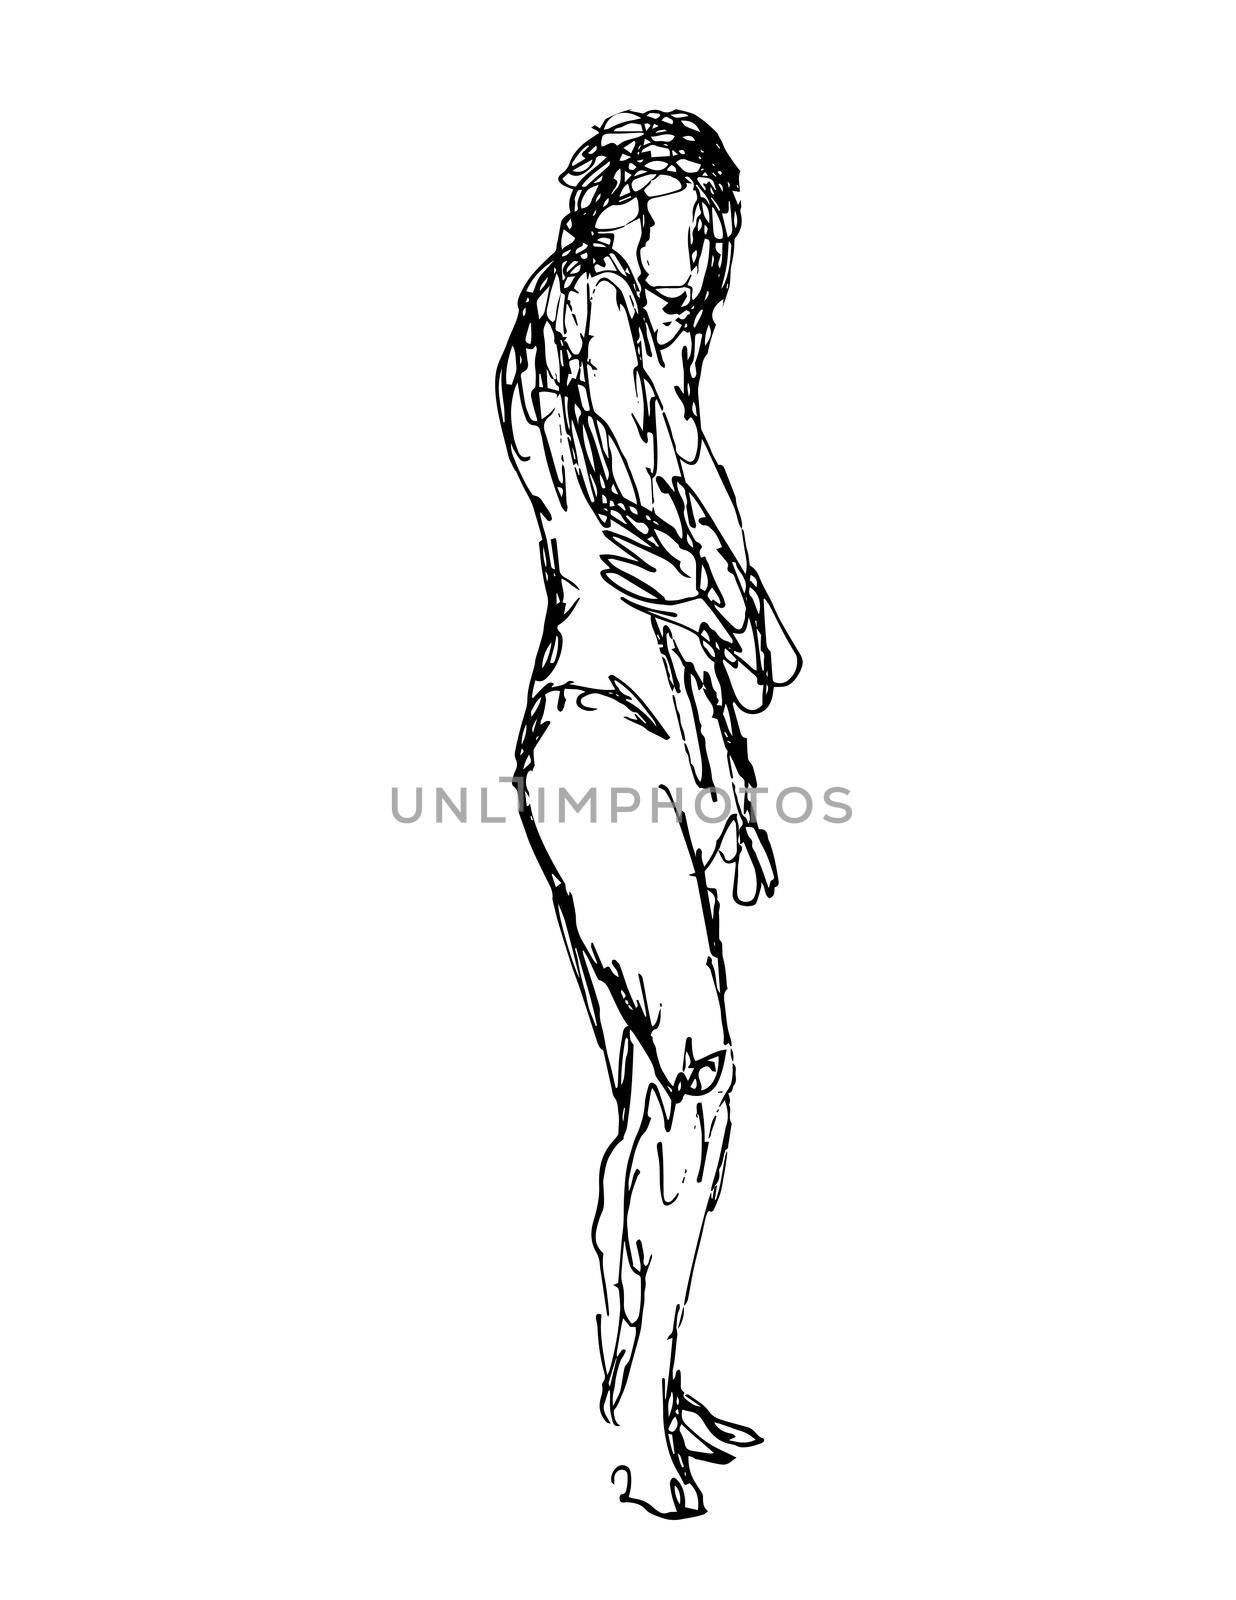 Doodle art illustration of a nude female human figure posing standing done in continuous line drawing style in black and white on isolated background.